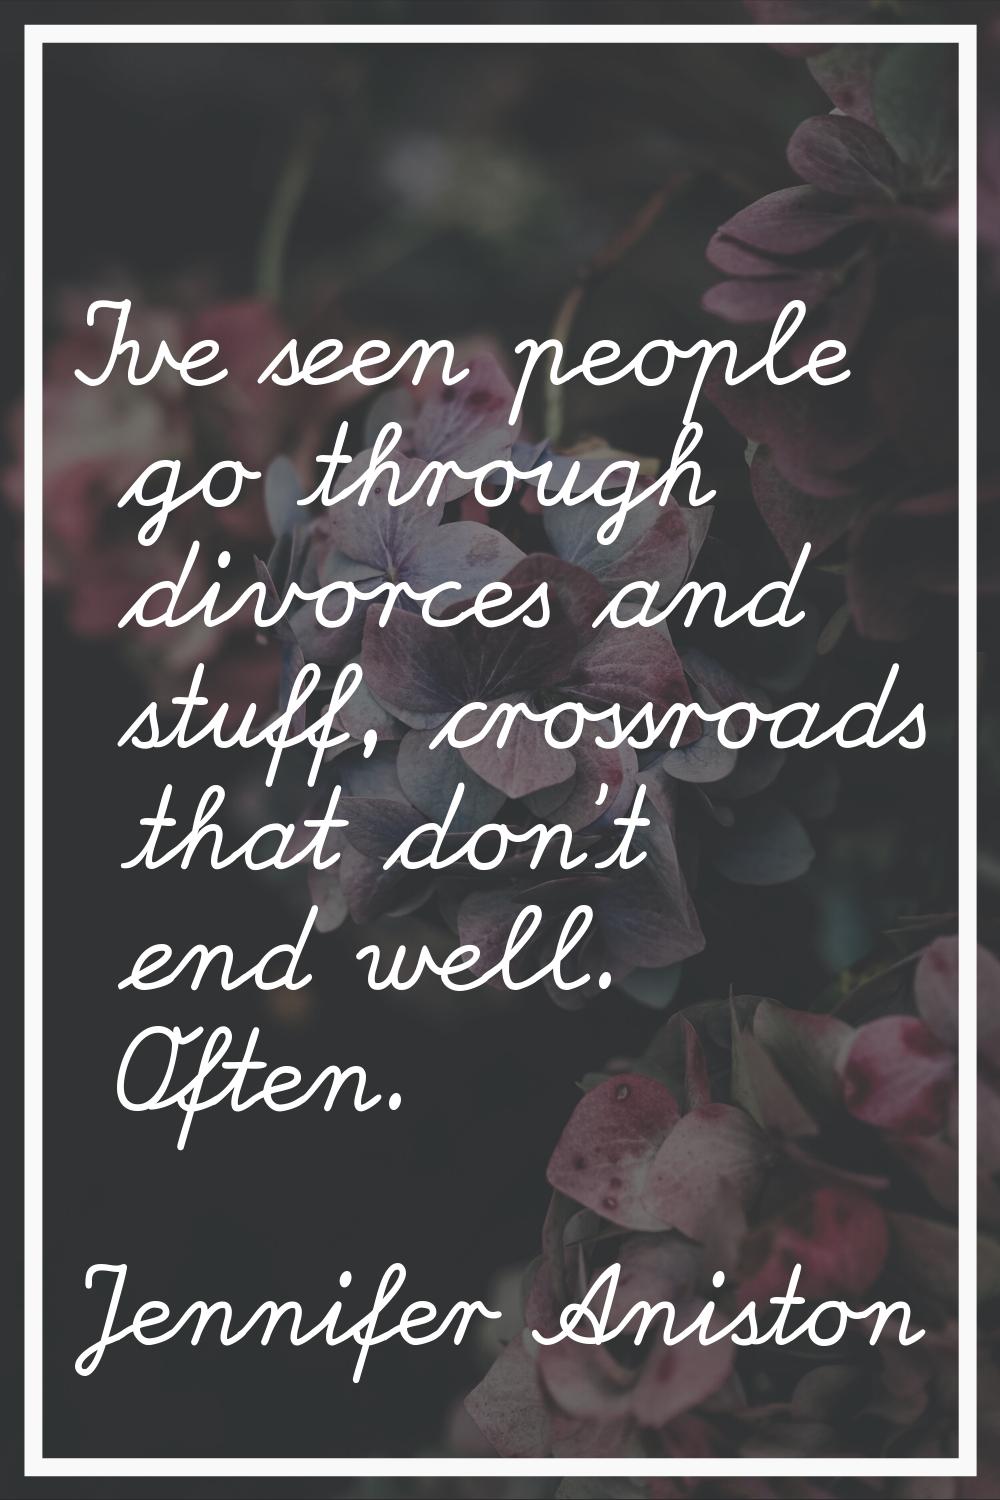 I've seen people go through divorces and stuff, crossroads that don't end well. Often.